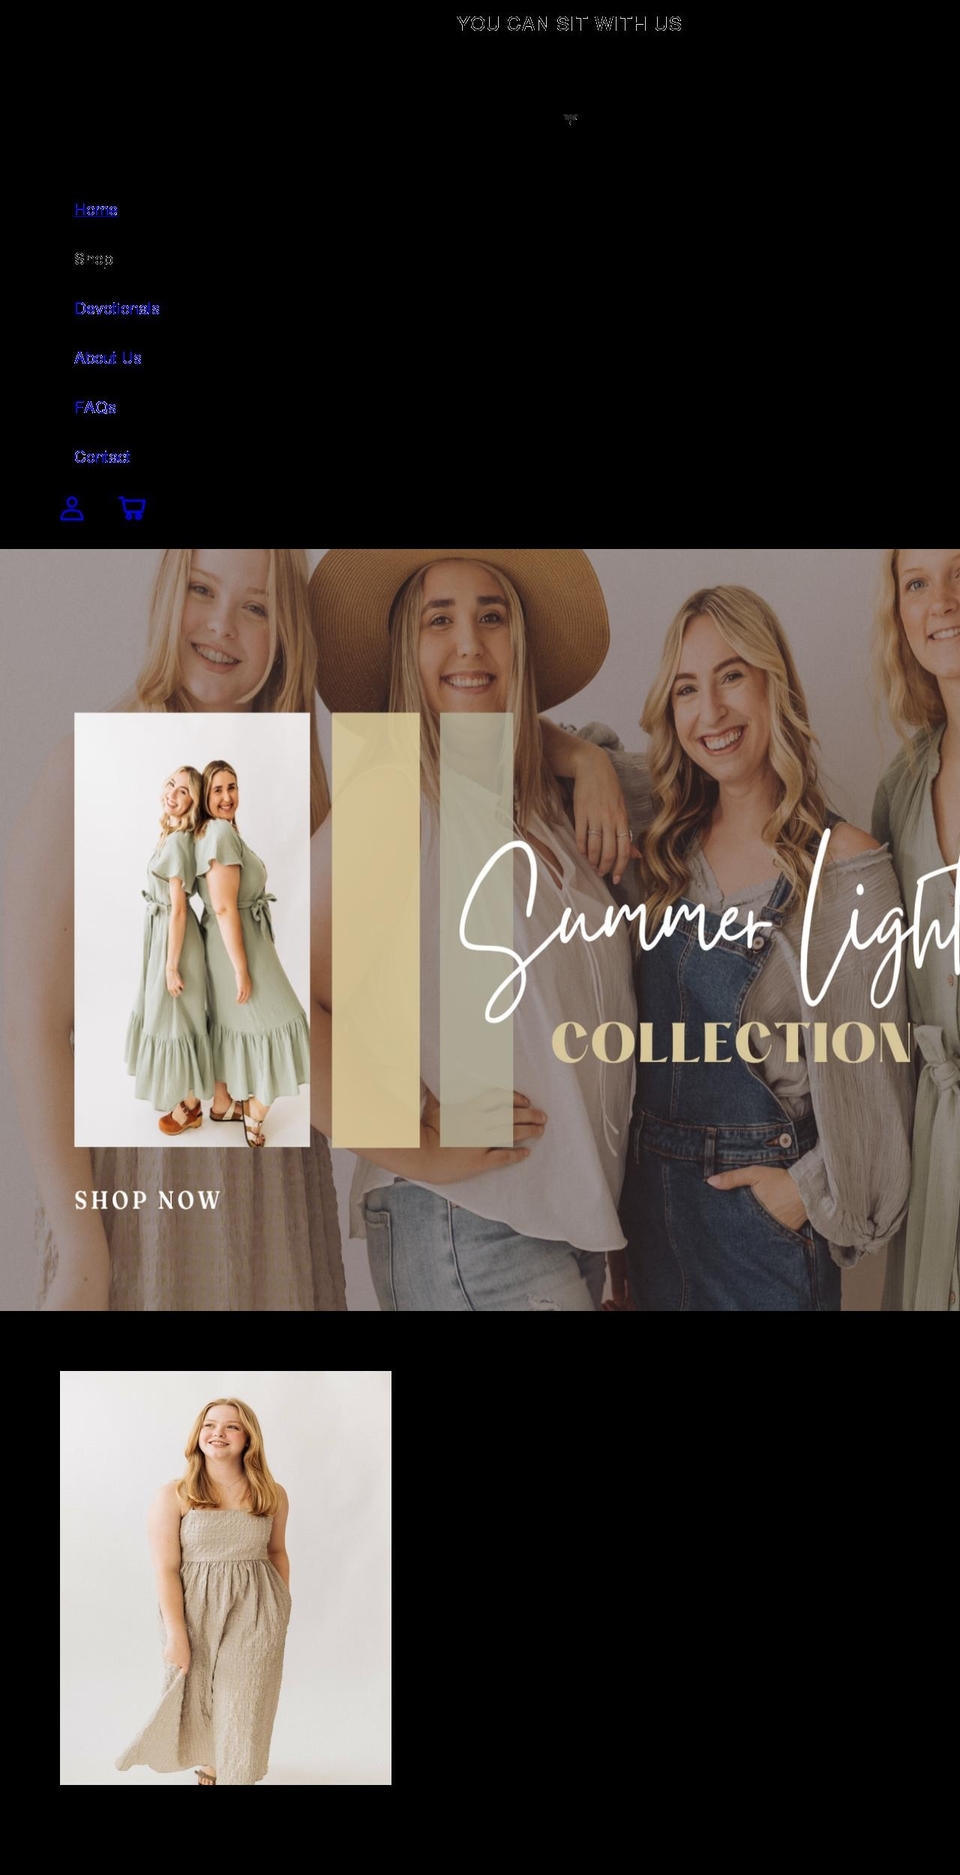 inspire Shopify theme site example shopthedragonflyboutique.com